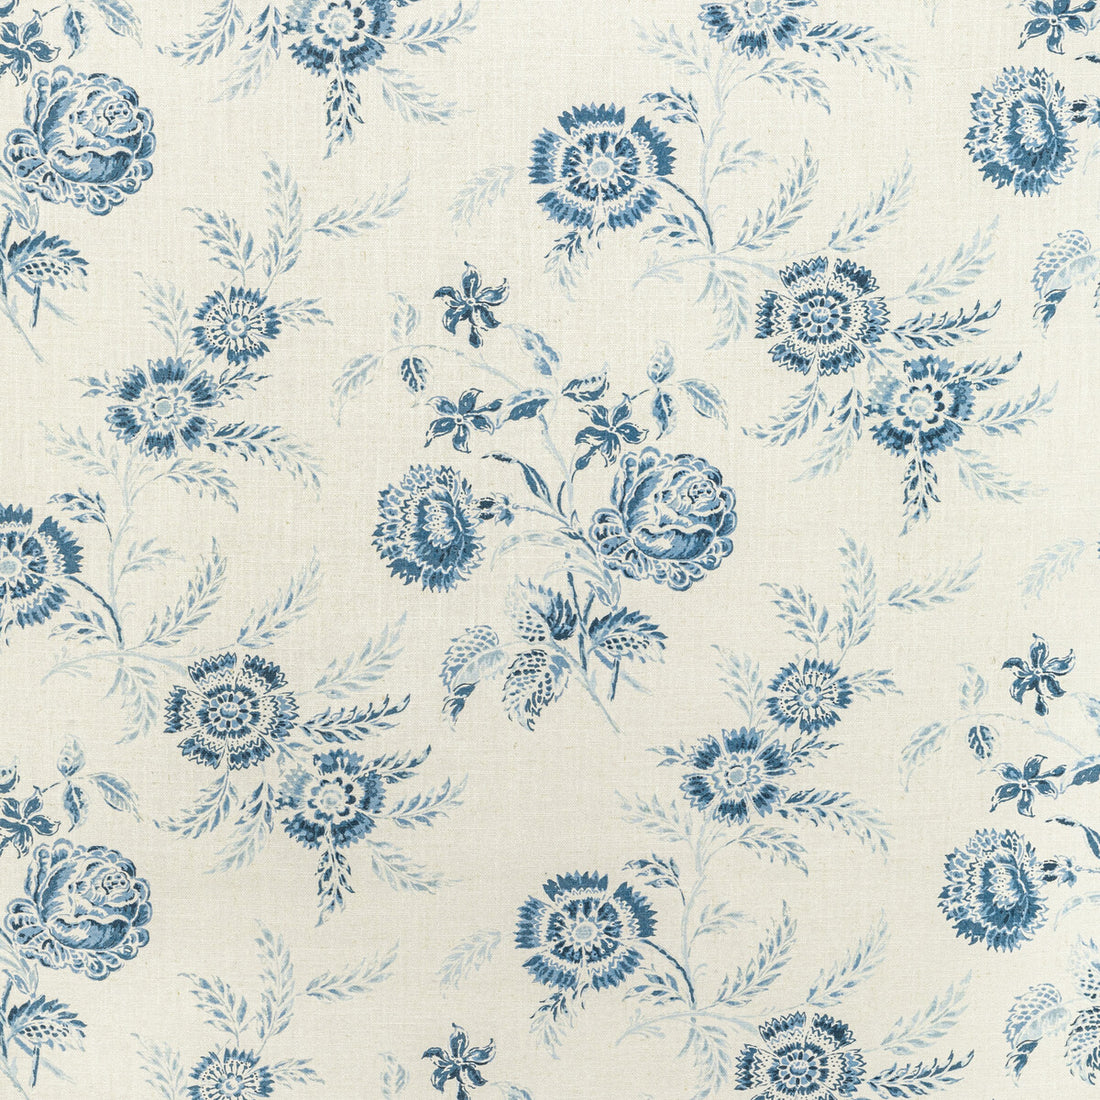 Boutique Floral fabric in delft color - pattern 2022101.5.0 - by Lee Jofa in the Sarah Bartholomew collection